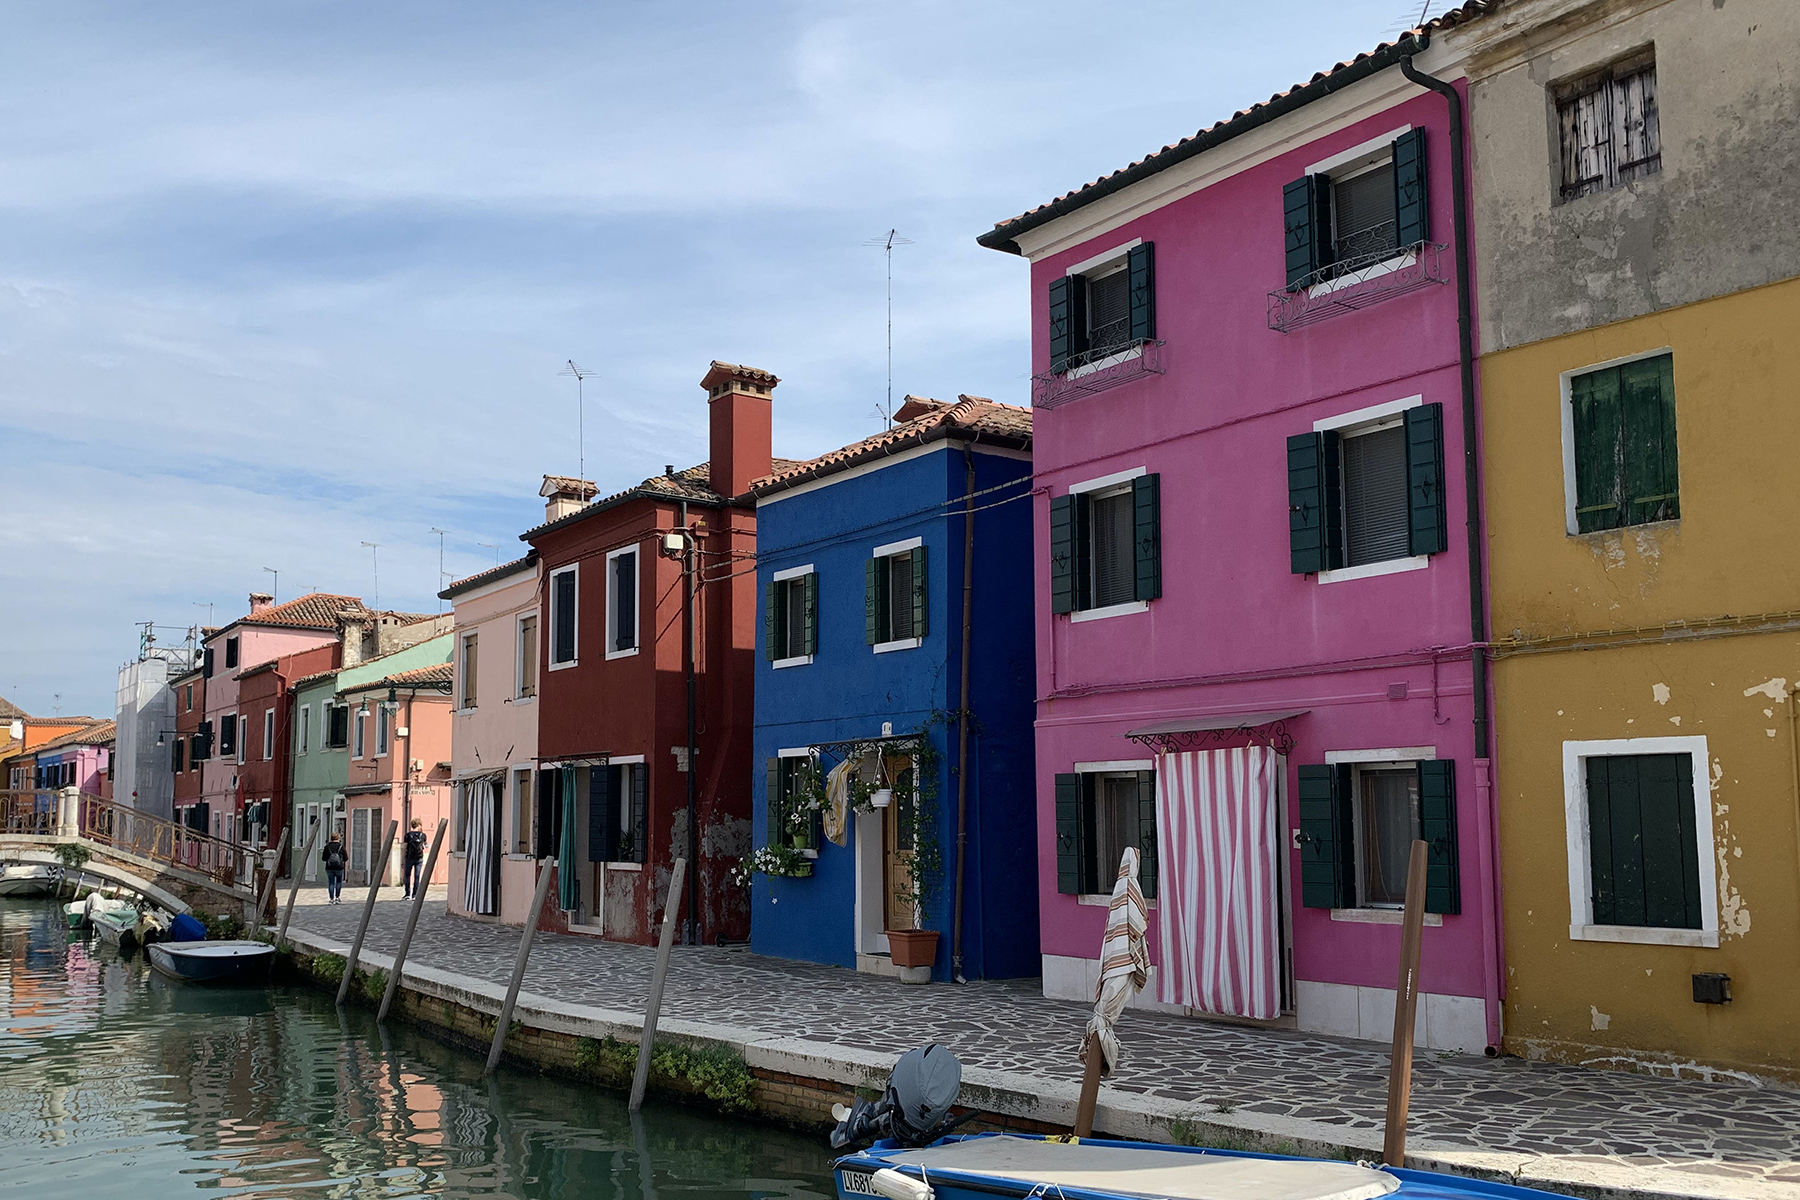 A selection of colorful houses along a canal